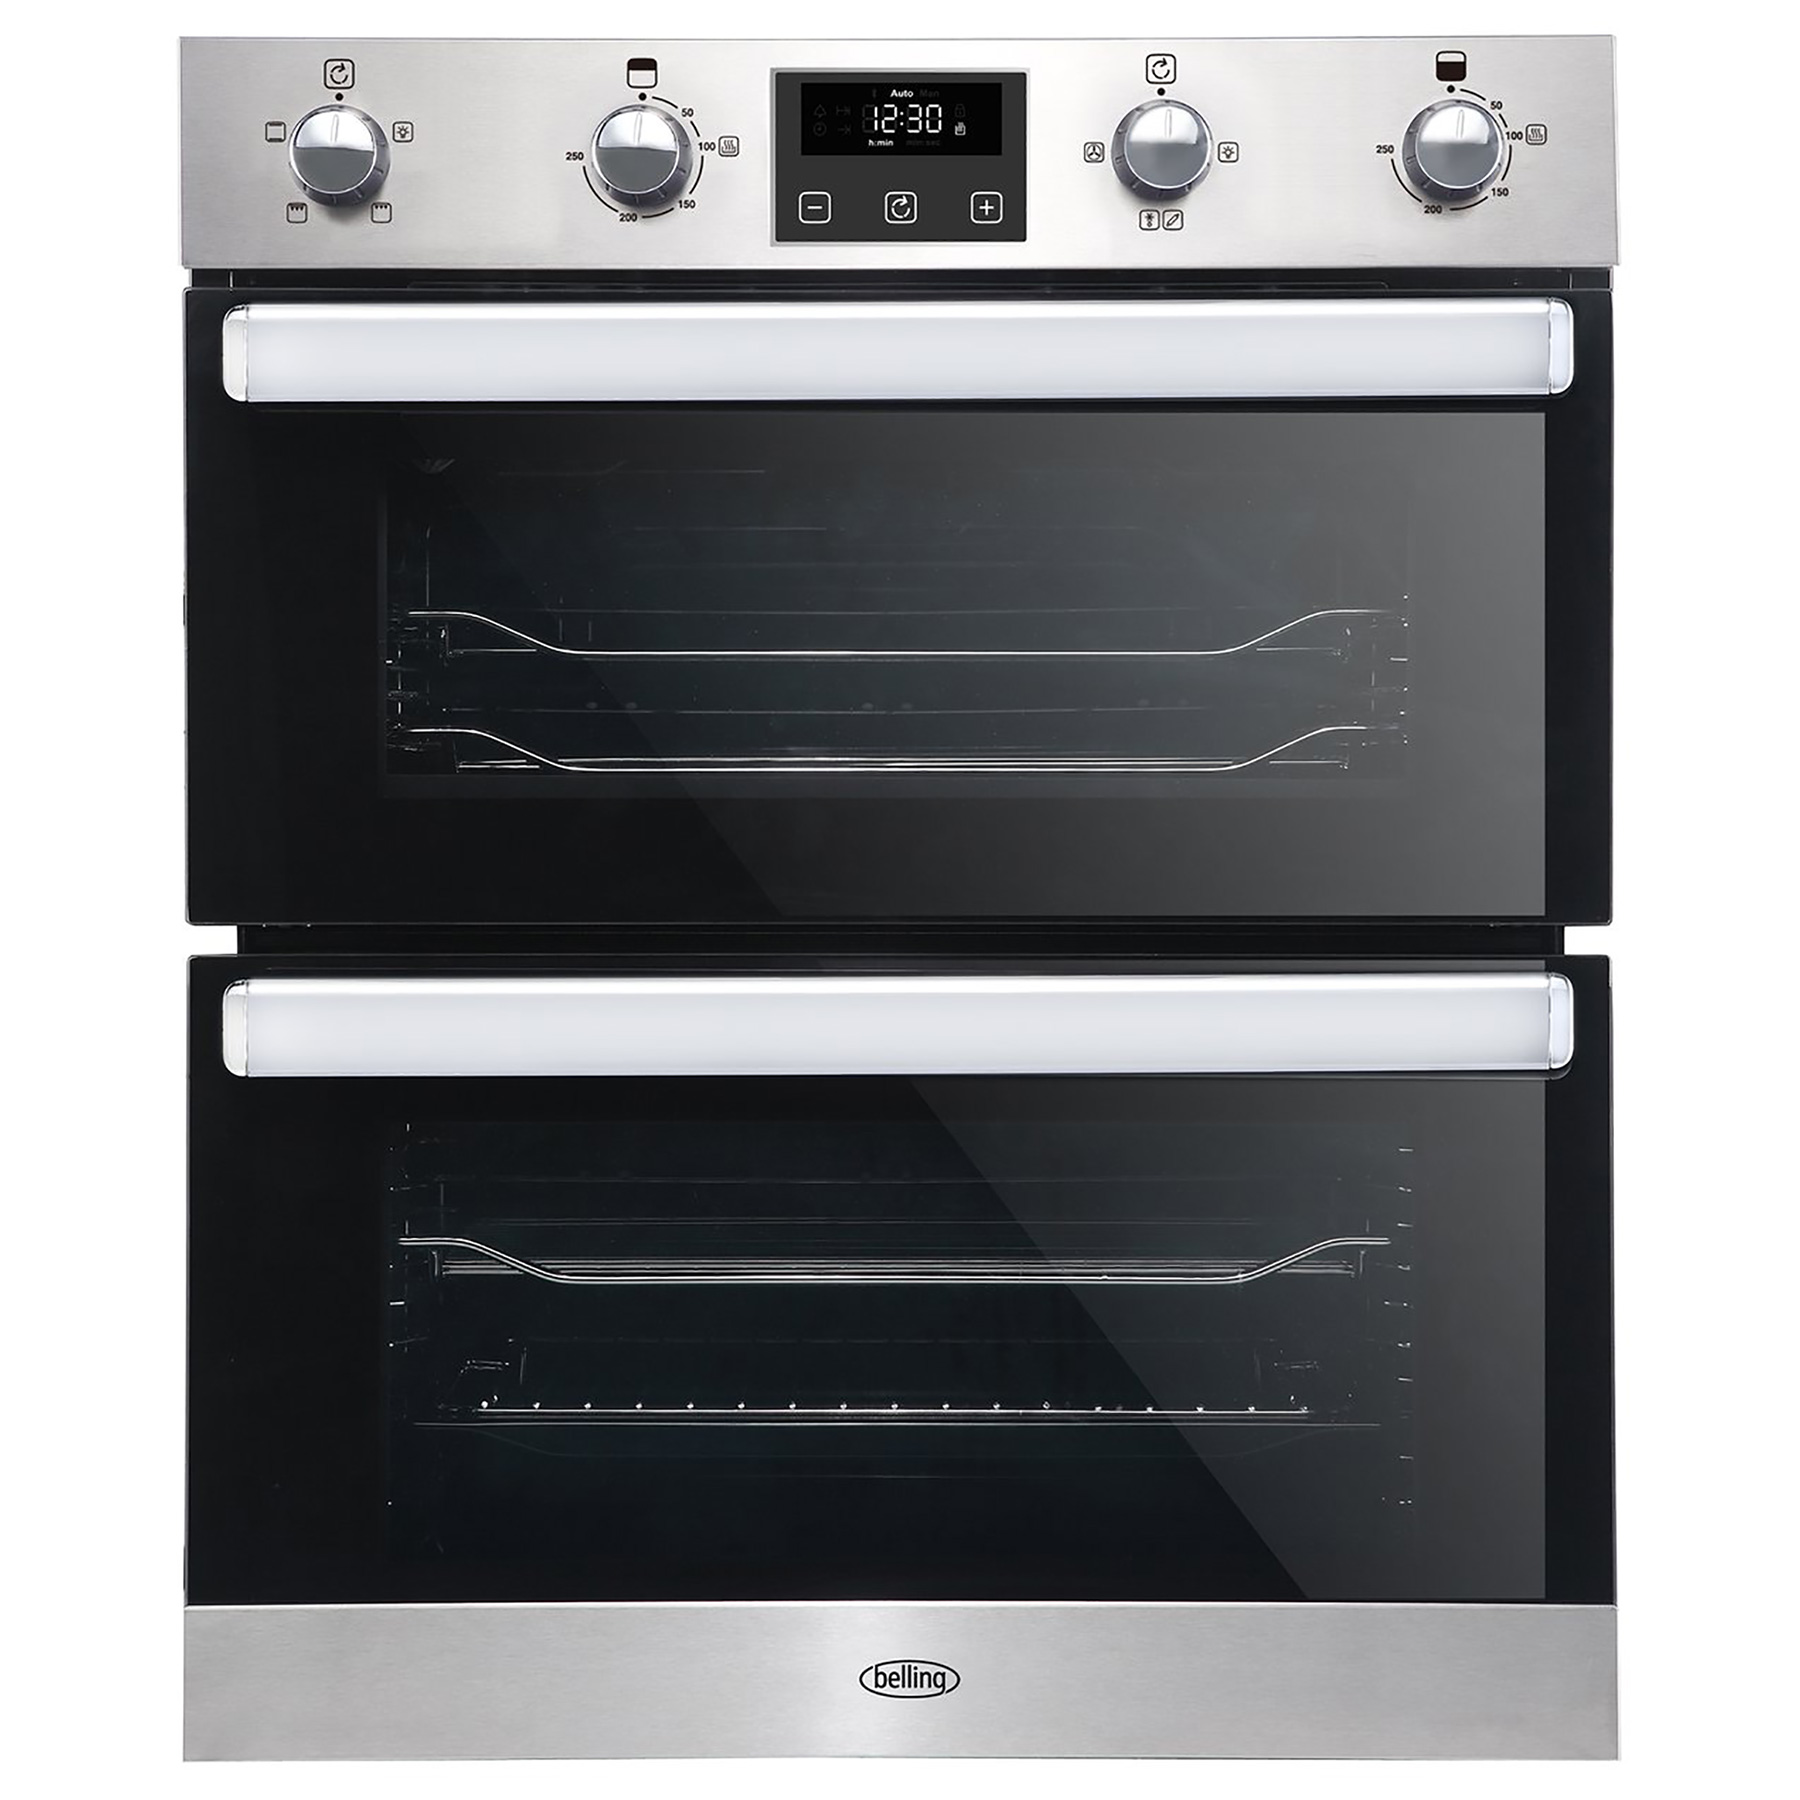 Image of Belling 444444781 70cm Built Under Electric Double Oven Stainless Stee